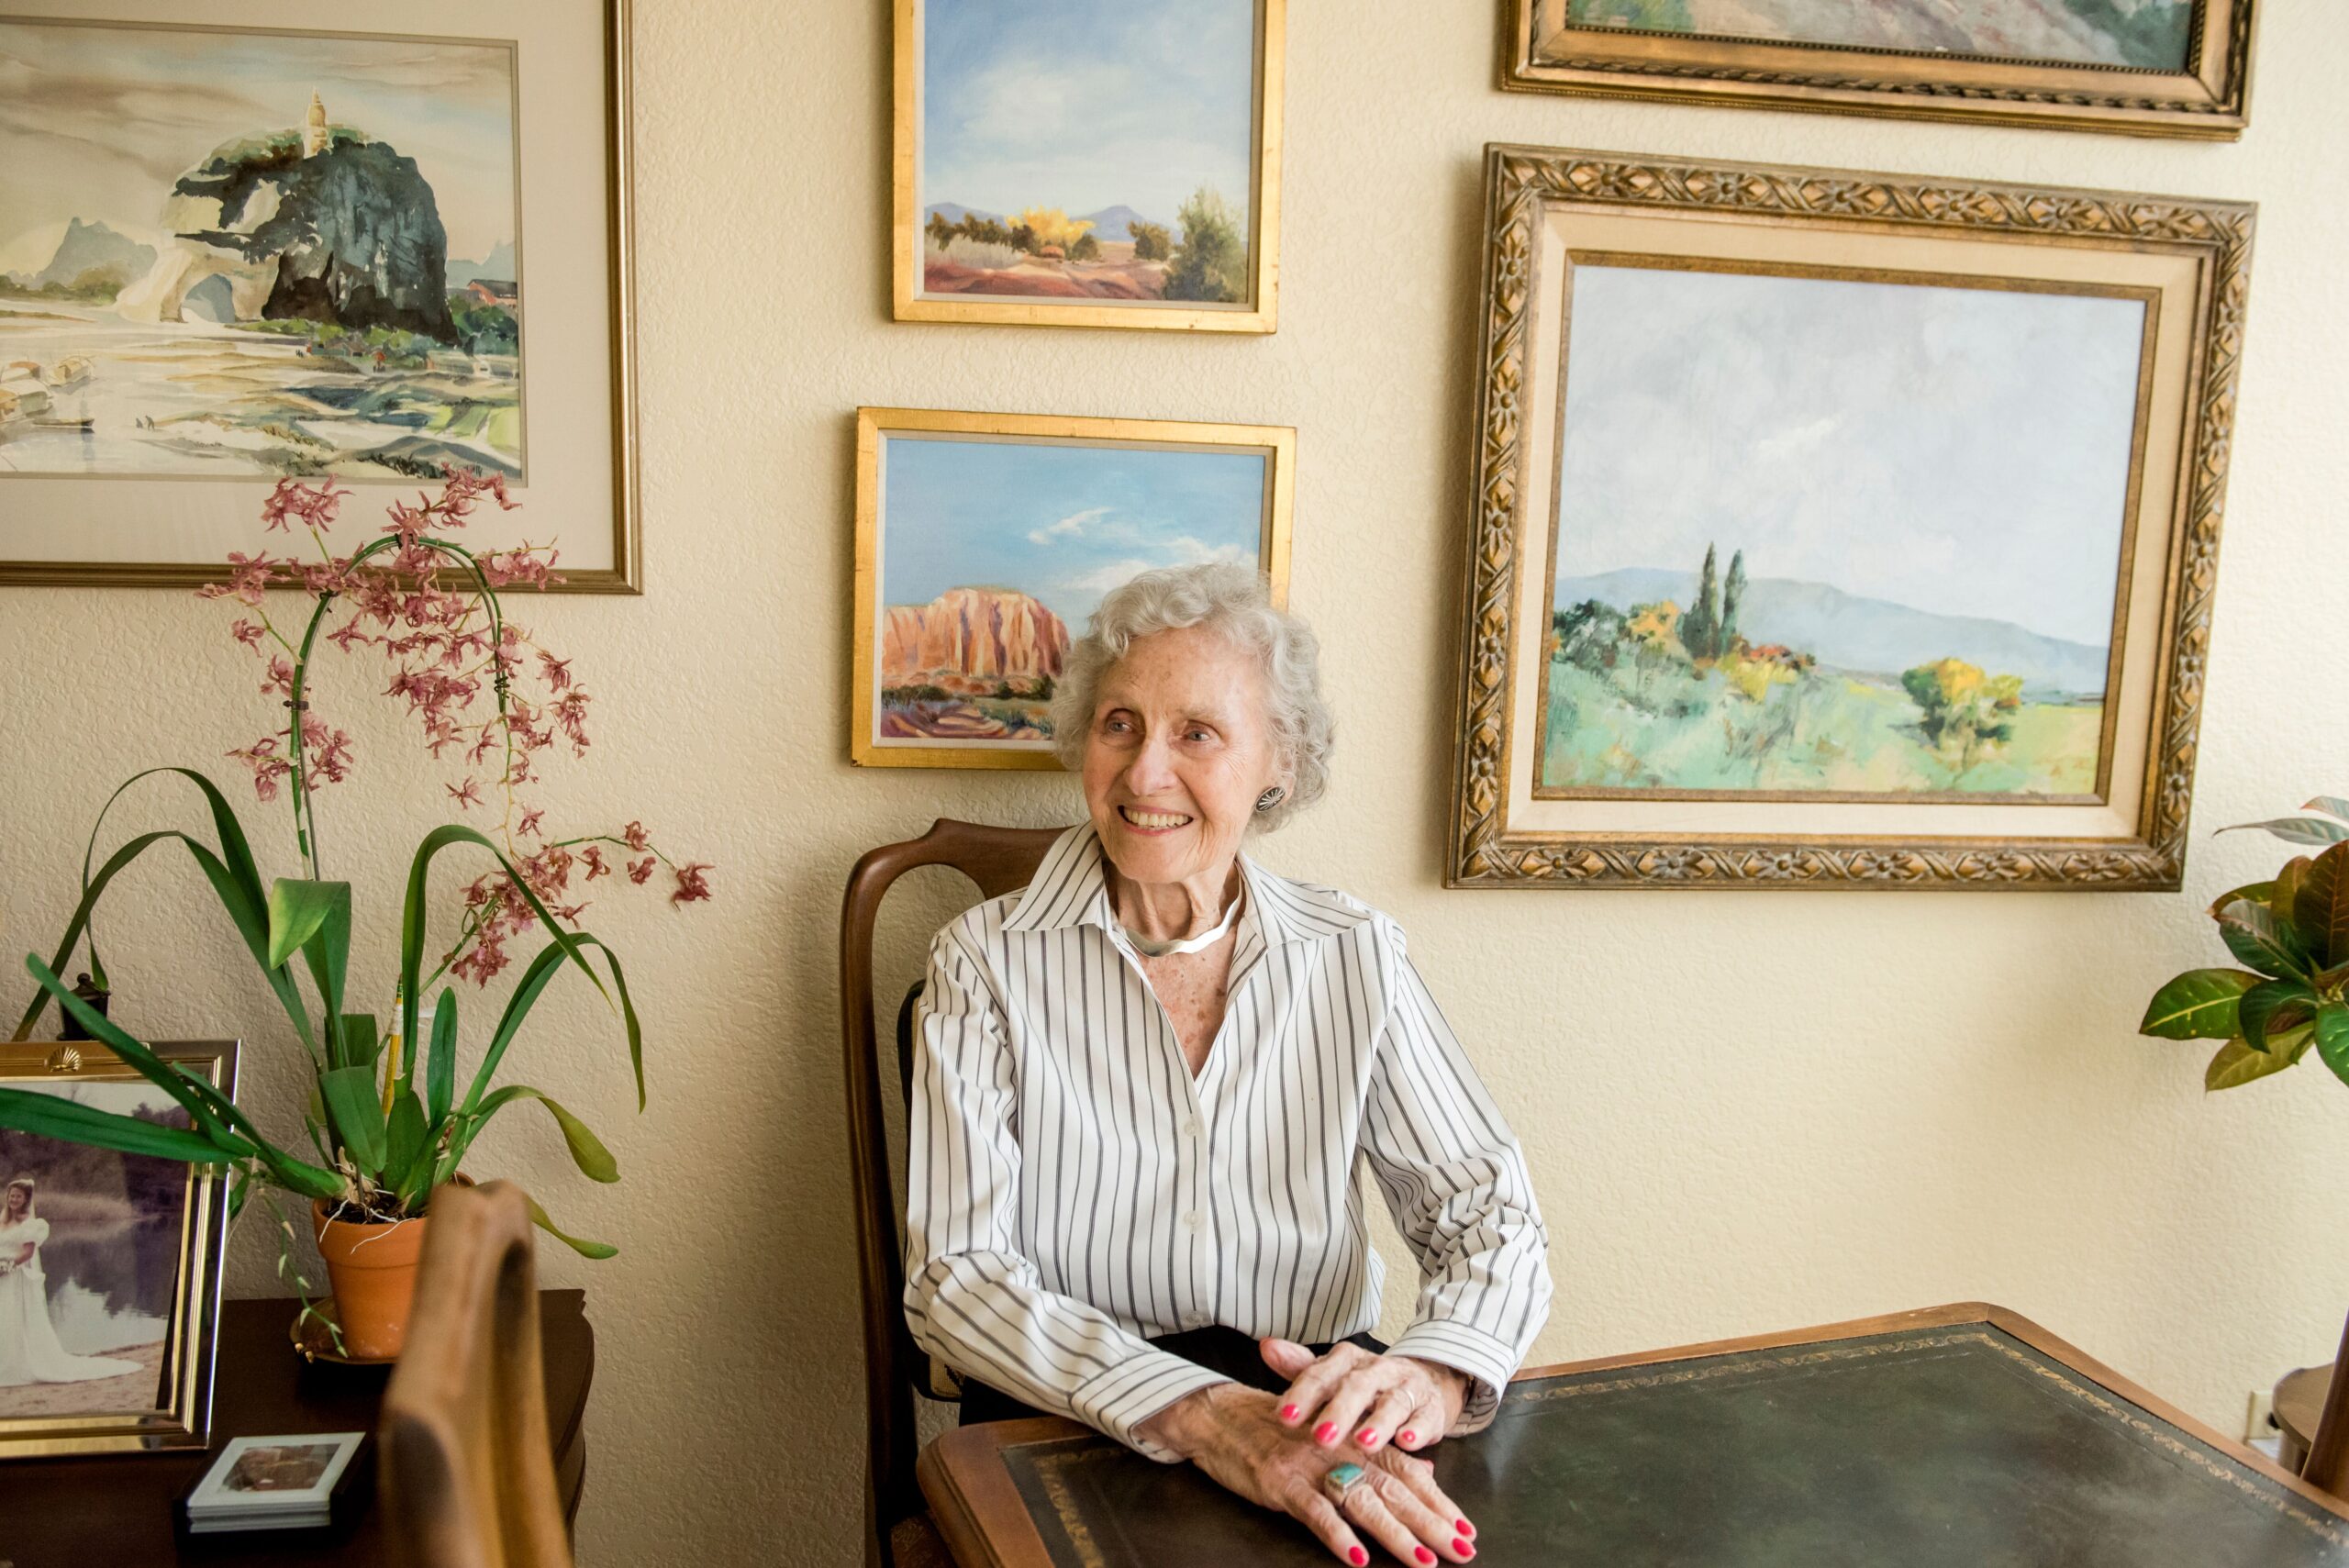 A senior woman sits smiling at a table with various watercolor paintings hanging on the wall behind her.